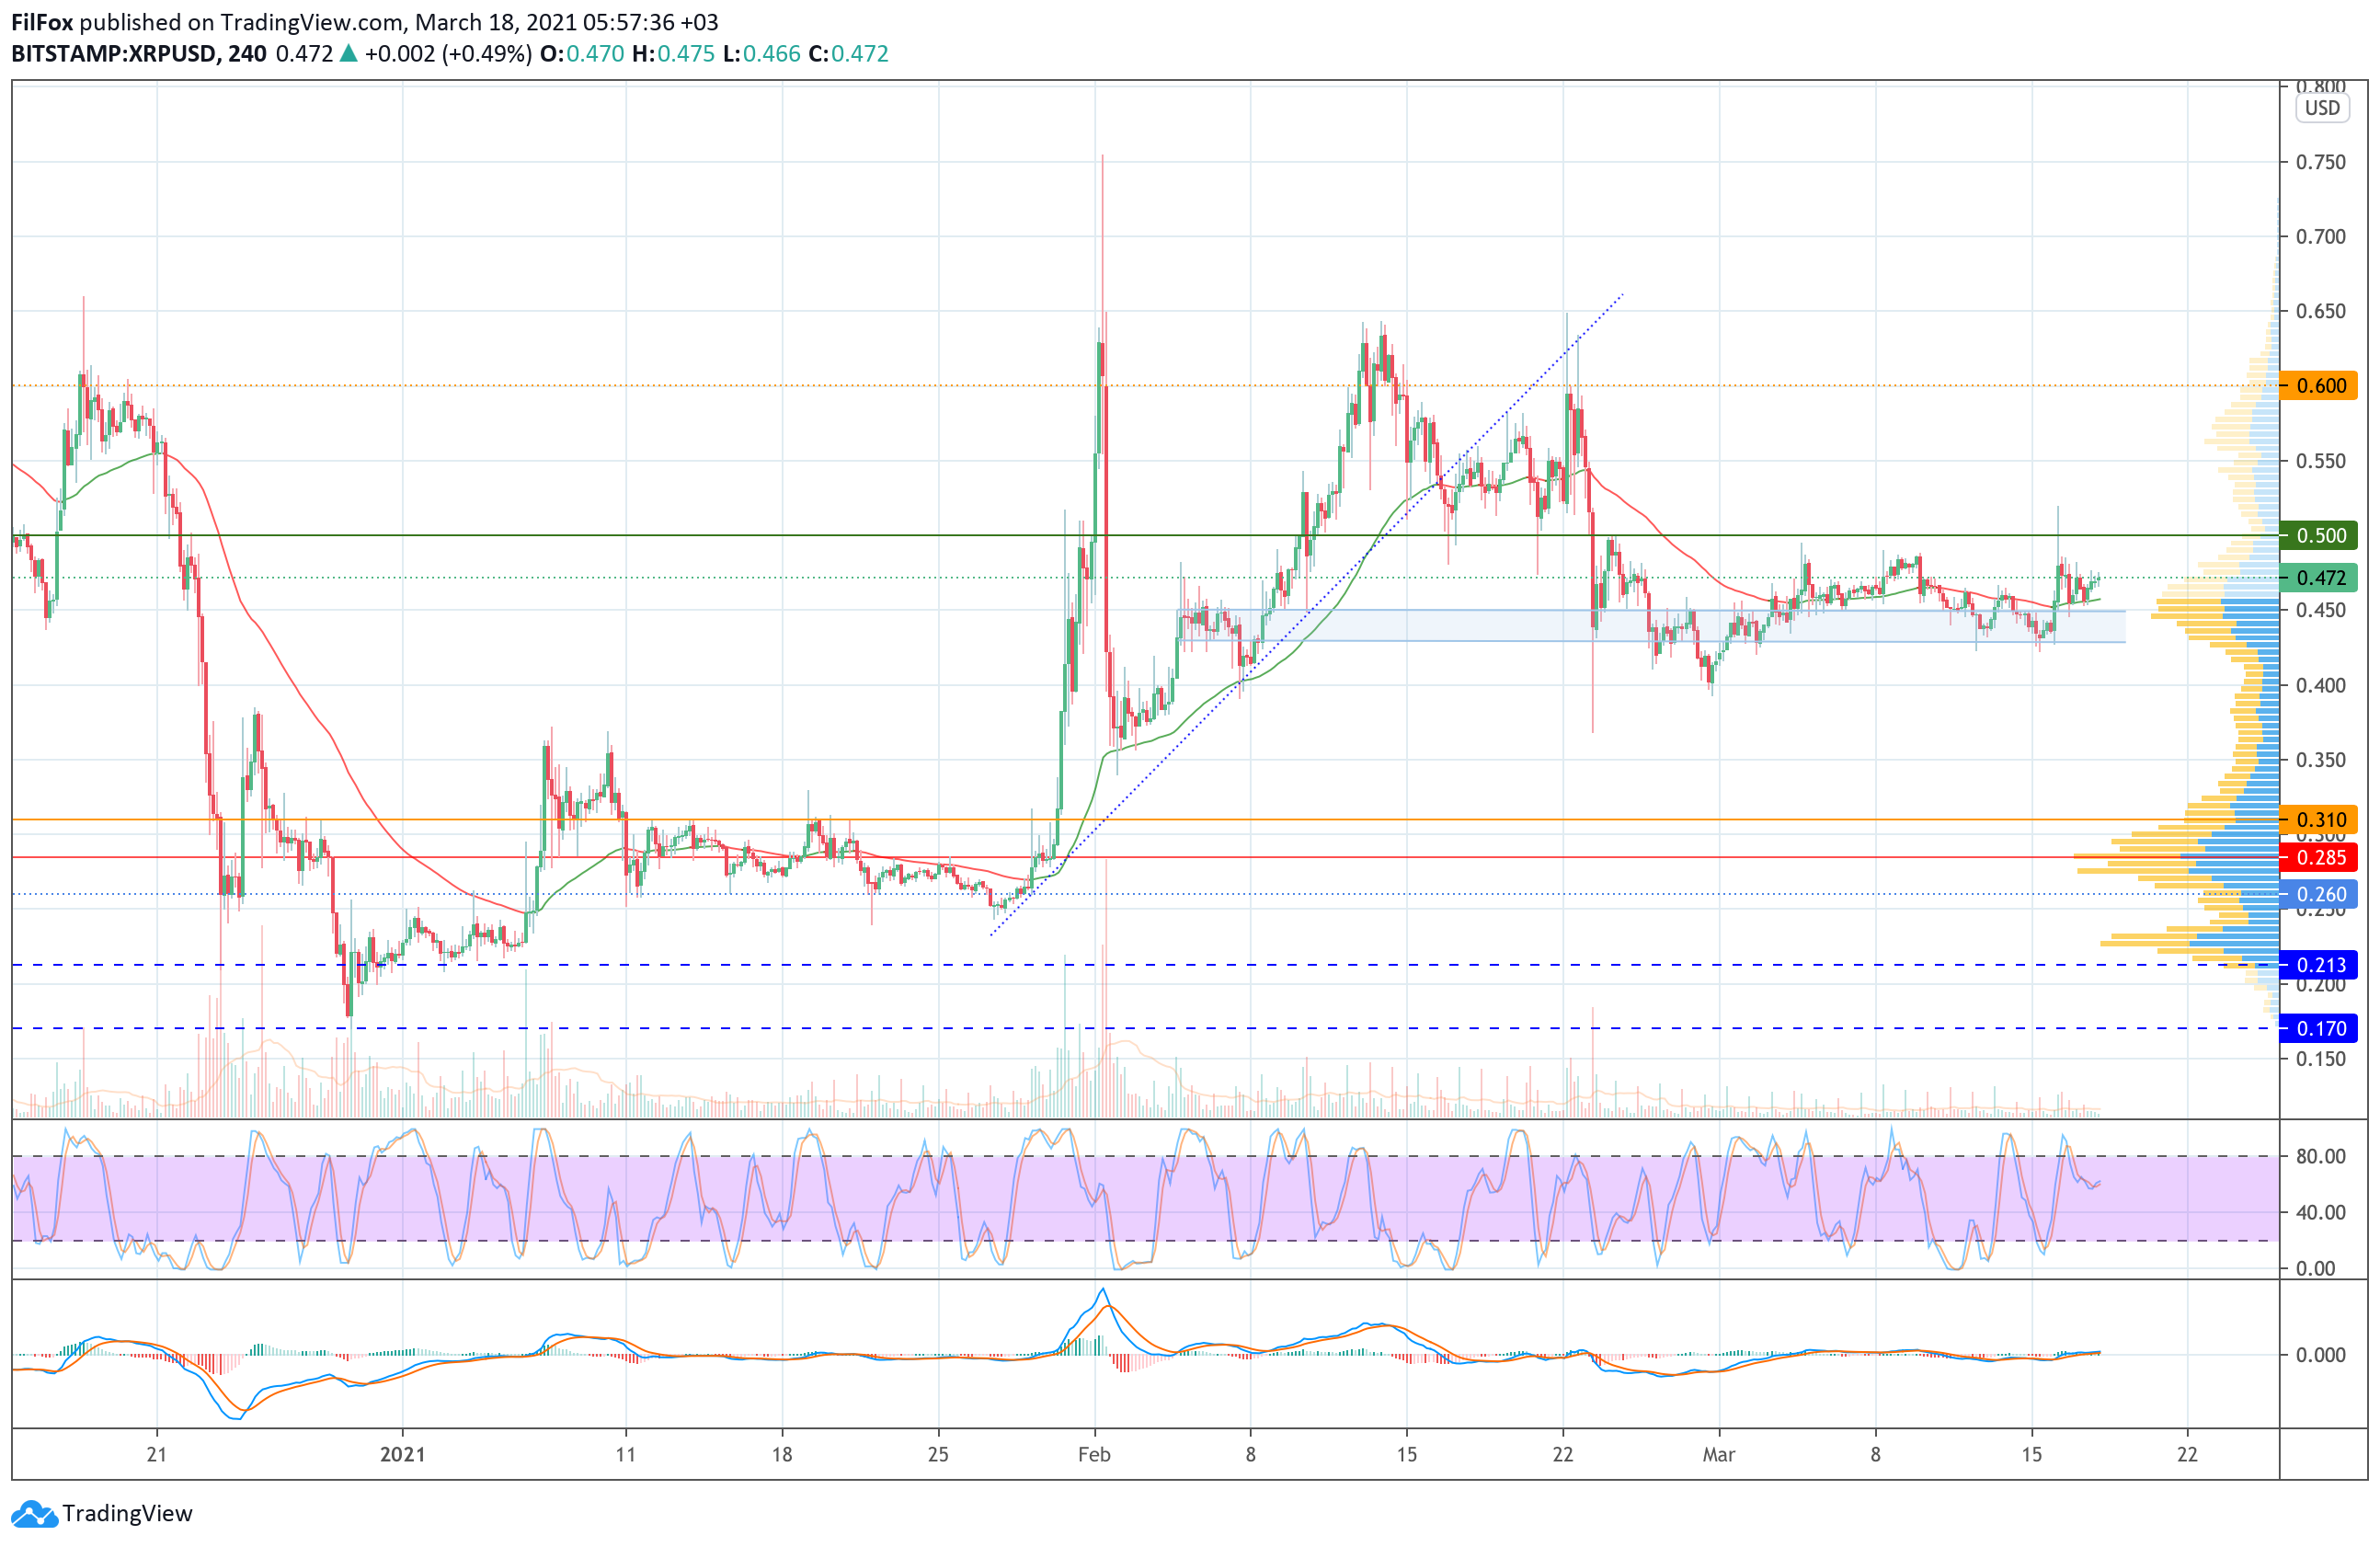 Analysis of the prices of Bitcoin, Ethereum, XRP for 03/18/2021